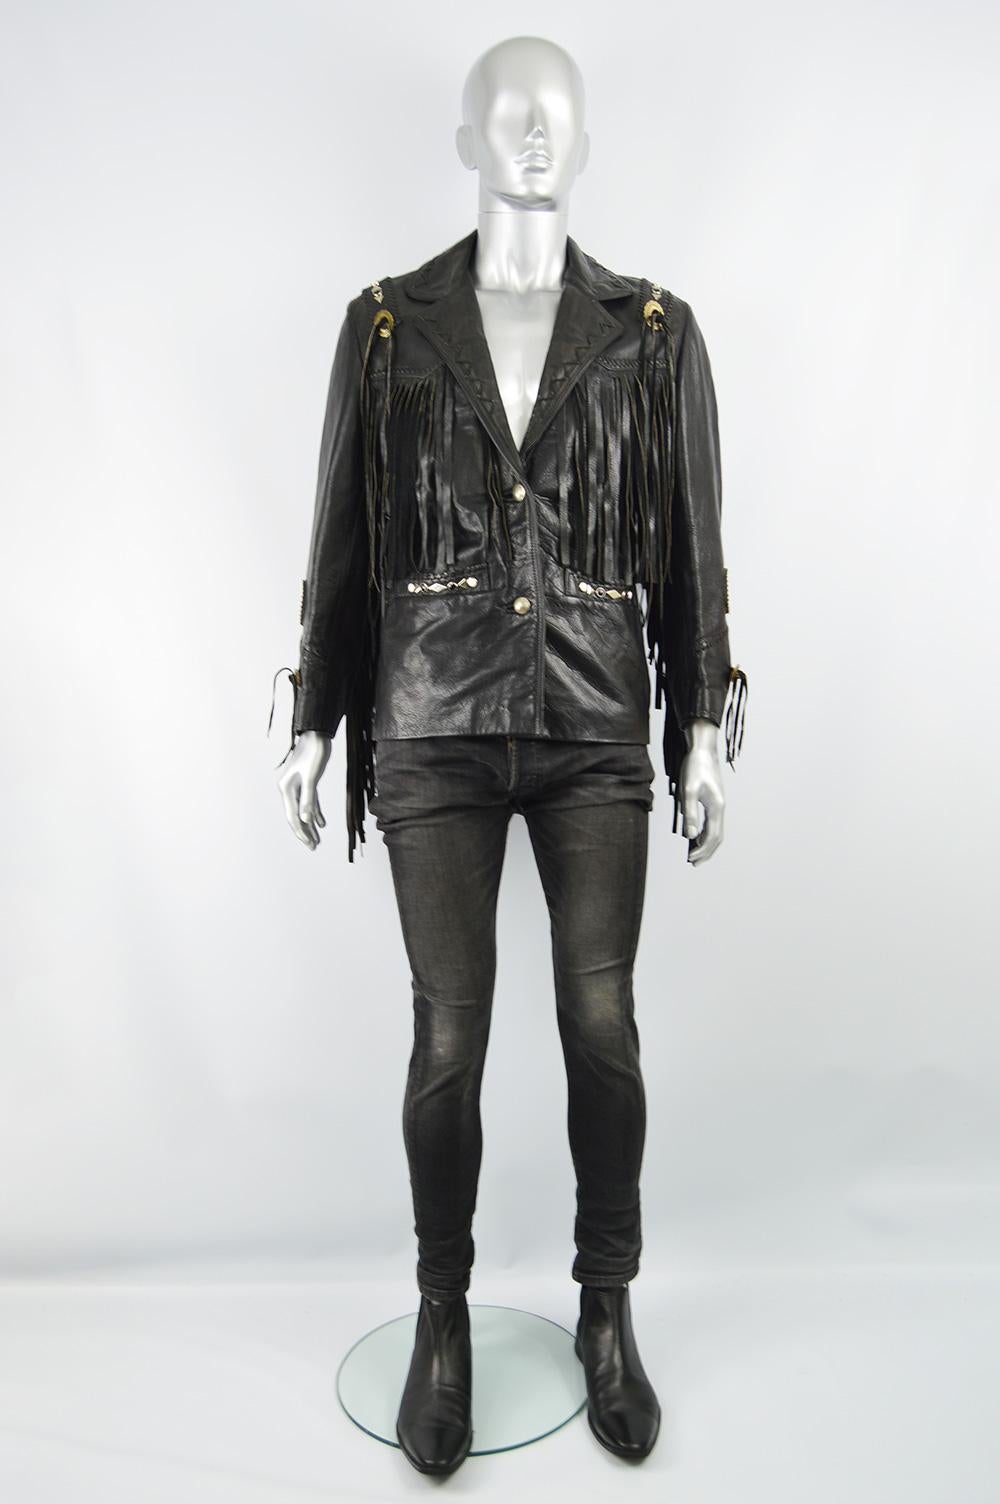 Kim Hadleigh Designs Vintage Men's Fringed Studded Black Leather Jacket, 1980s

Size: Marked vintage L but fits more like a modern Small to Medium. Please check measurements. 
Chest - 40” / 101cm
Waist - 36” / 91cm
Length (Shoulder to Hem) - 26” /